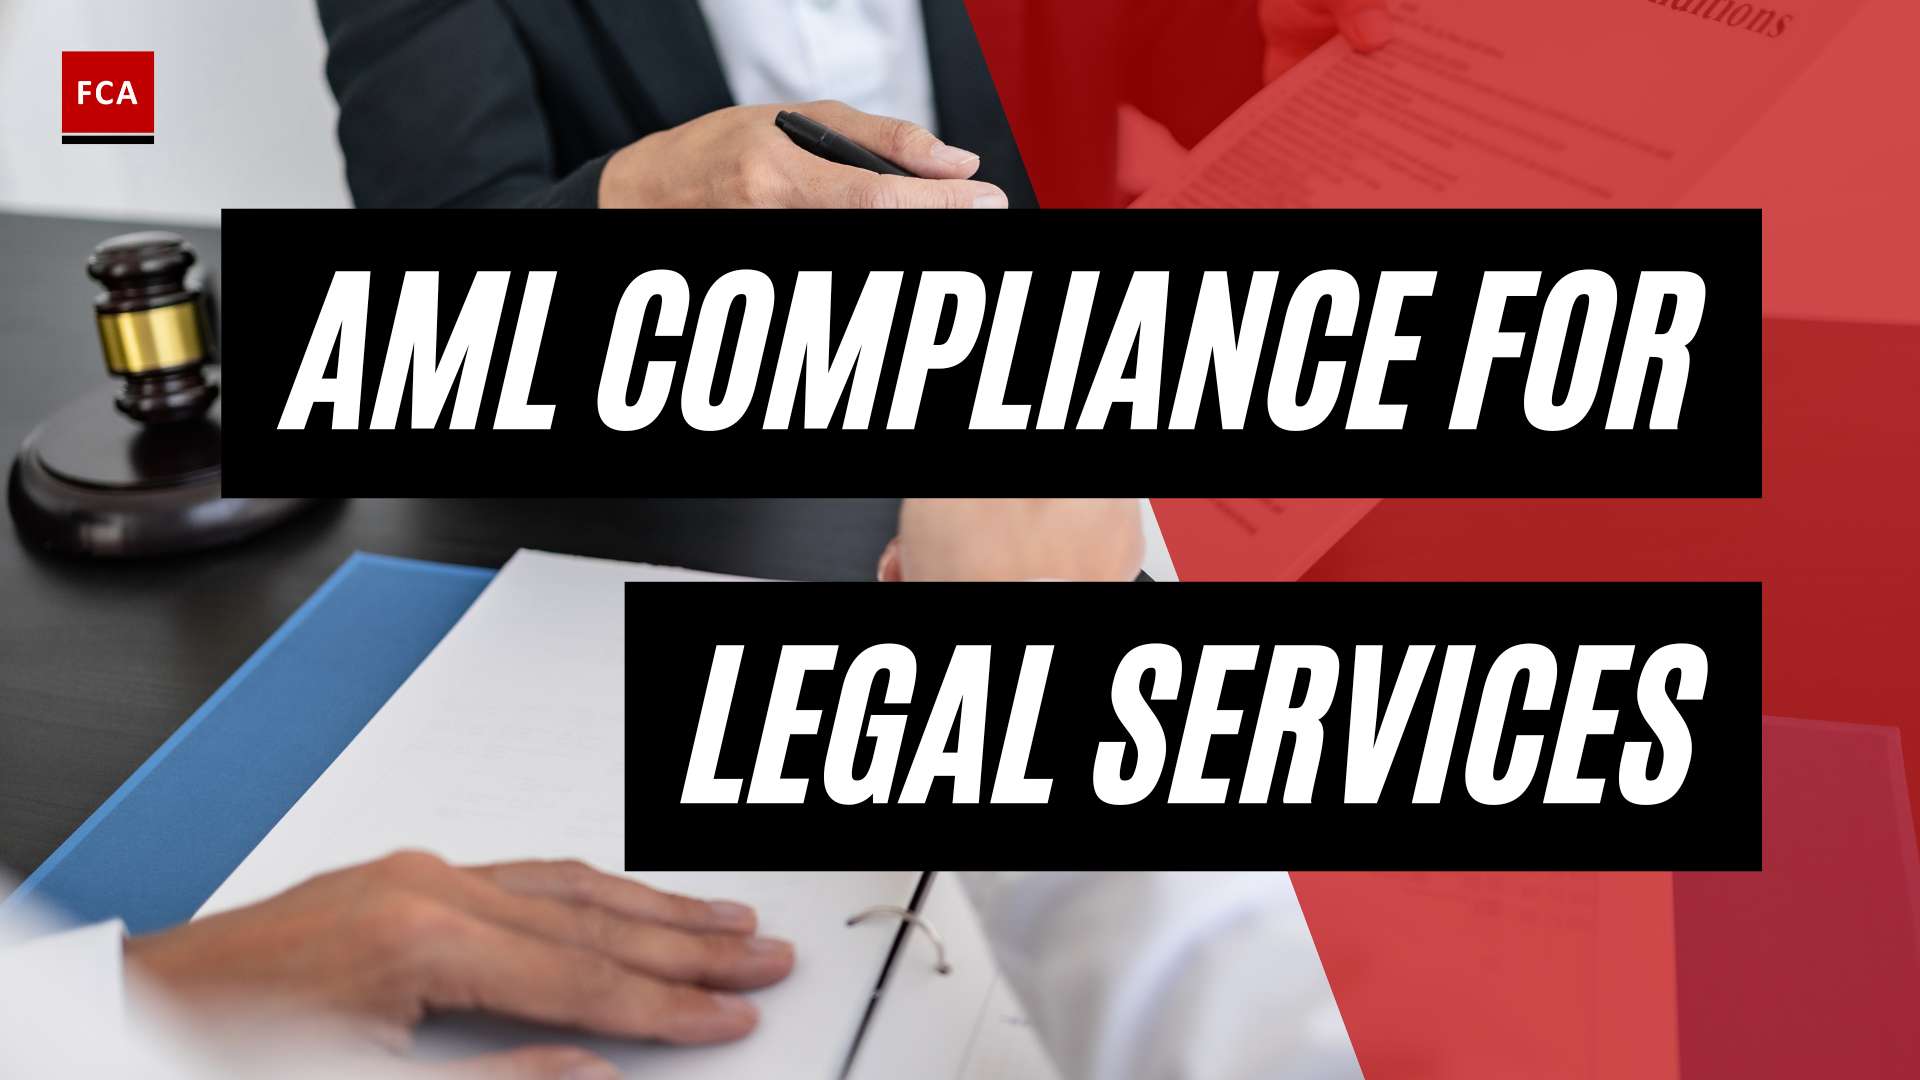 The Essential Guide To Aml Compliance For Legal Professionals